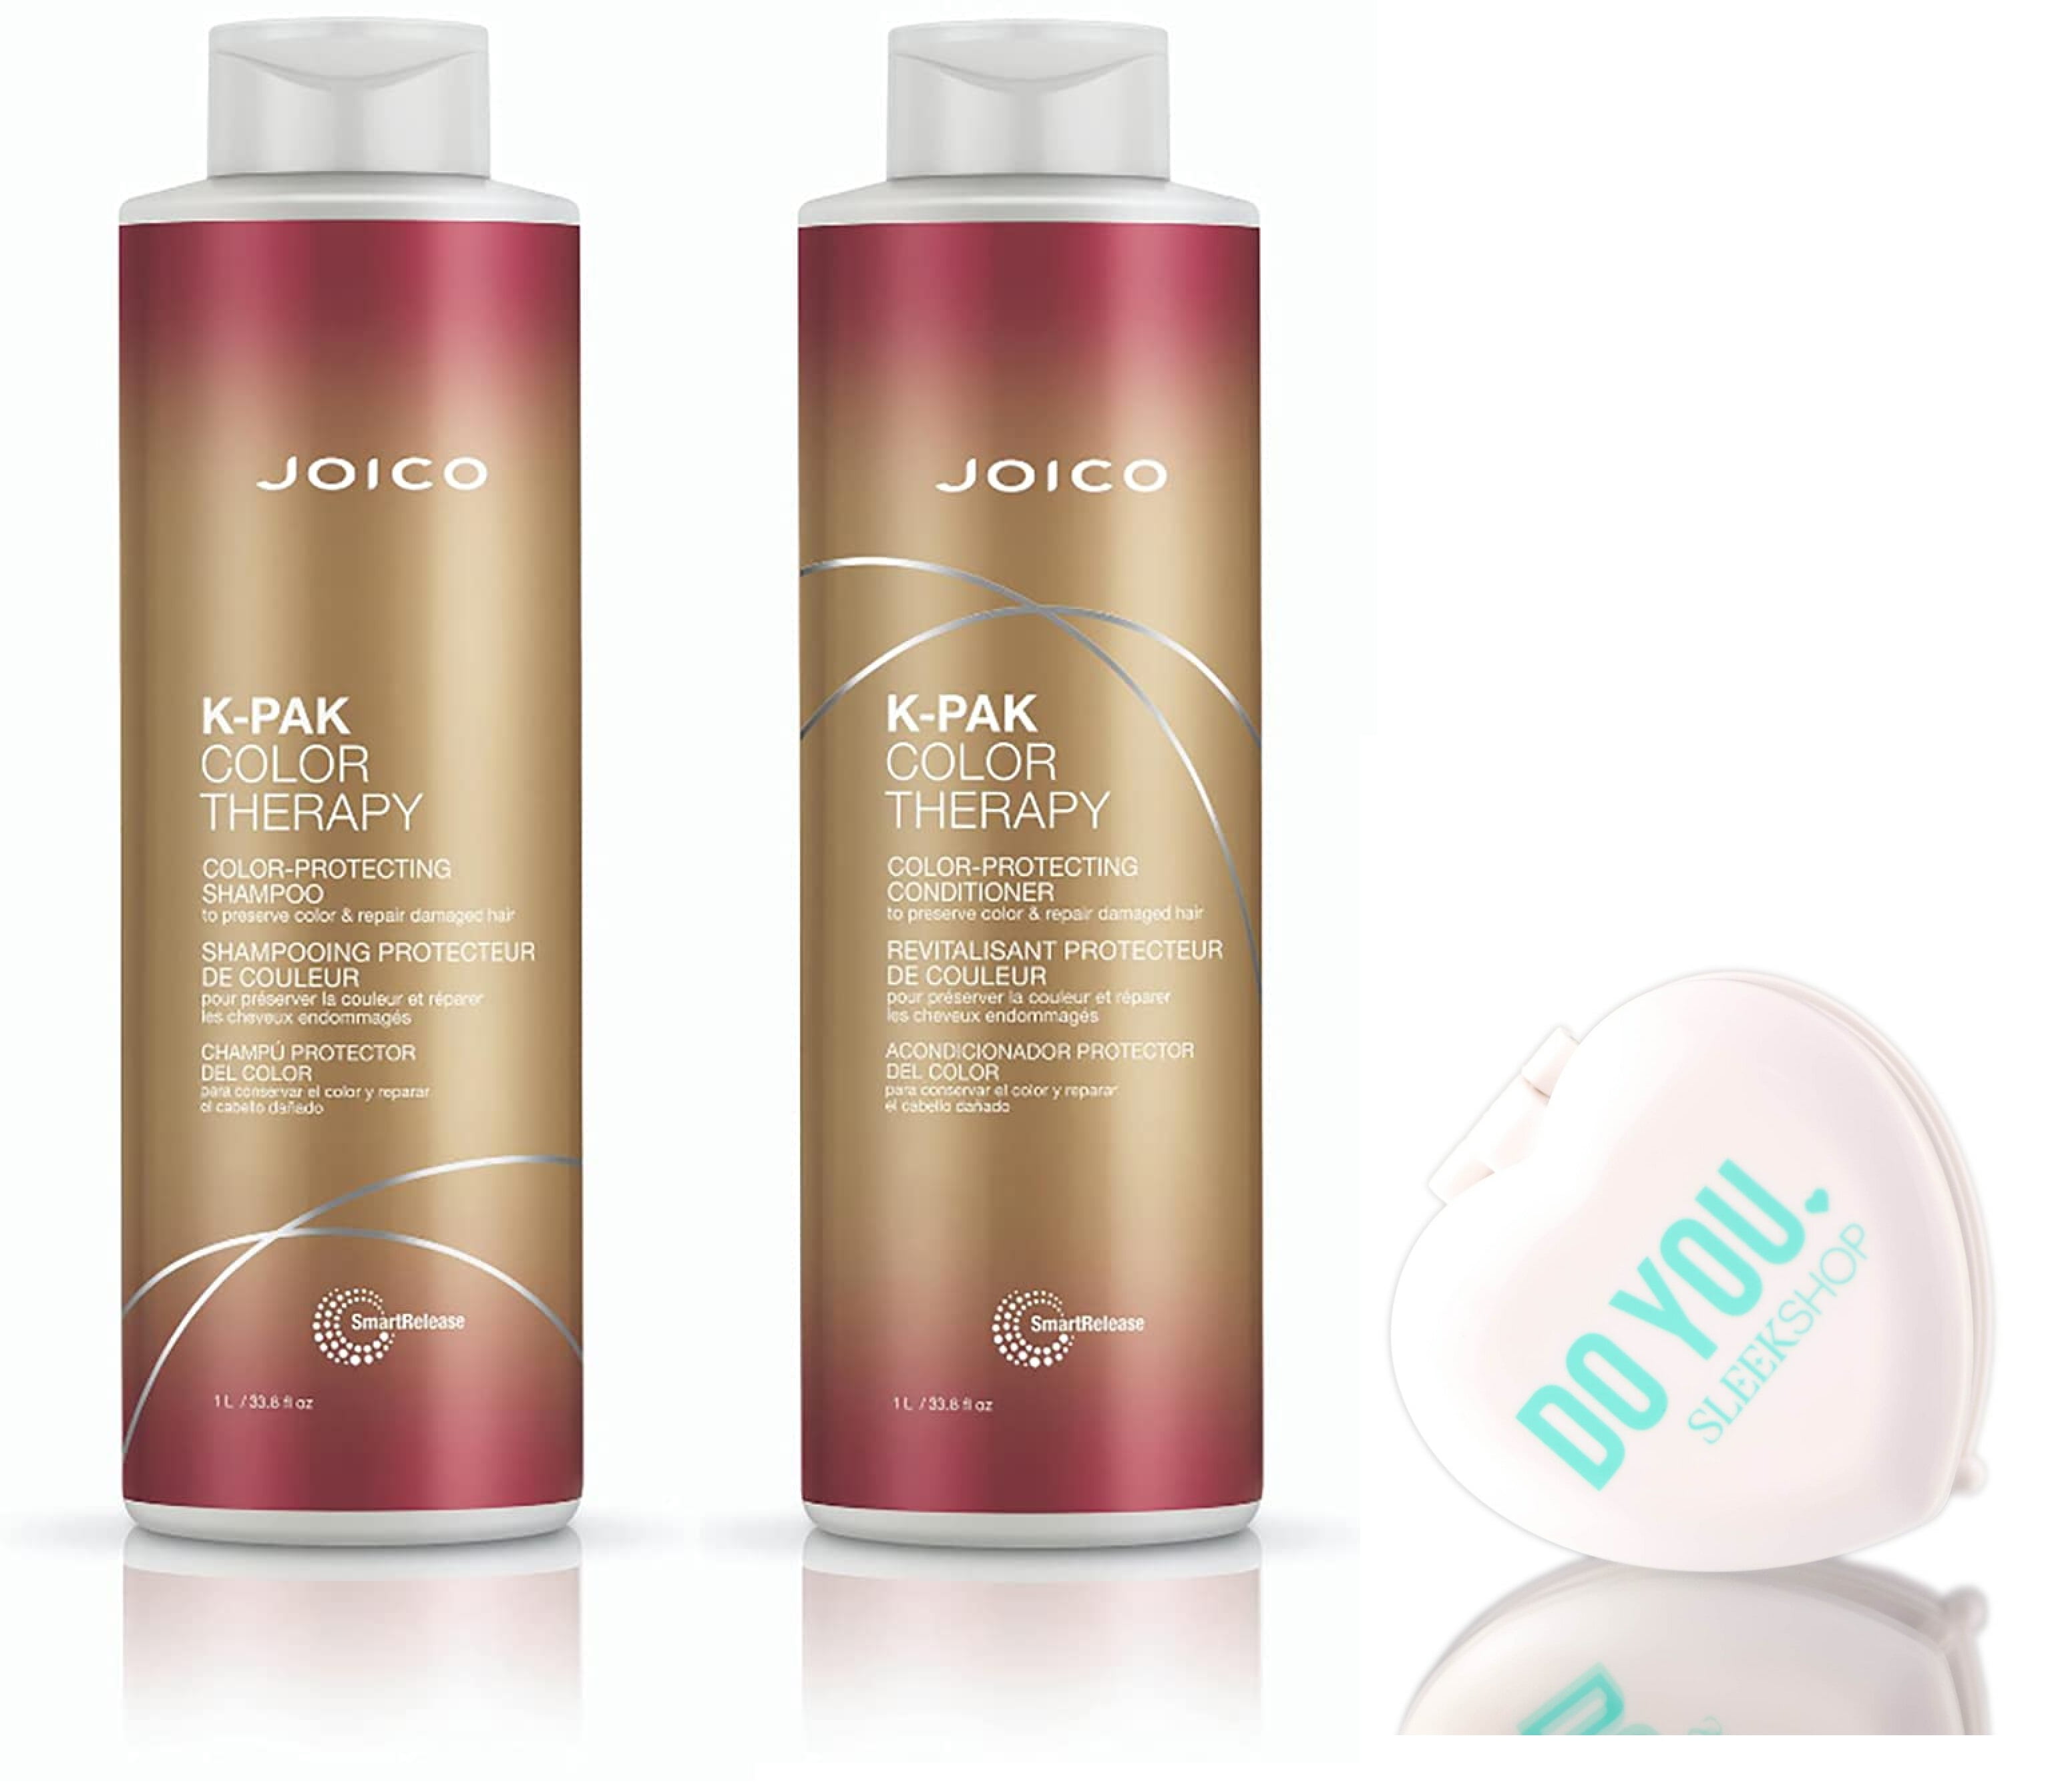 undervandsbåd Virkelig At interagere Joico K-Pak Color Therapy Shampoo & Conditioner Duo Set Preserve Color W/  Mirror 10.1 Oz / 300Ml Duo Kit - Walmart.com